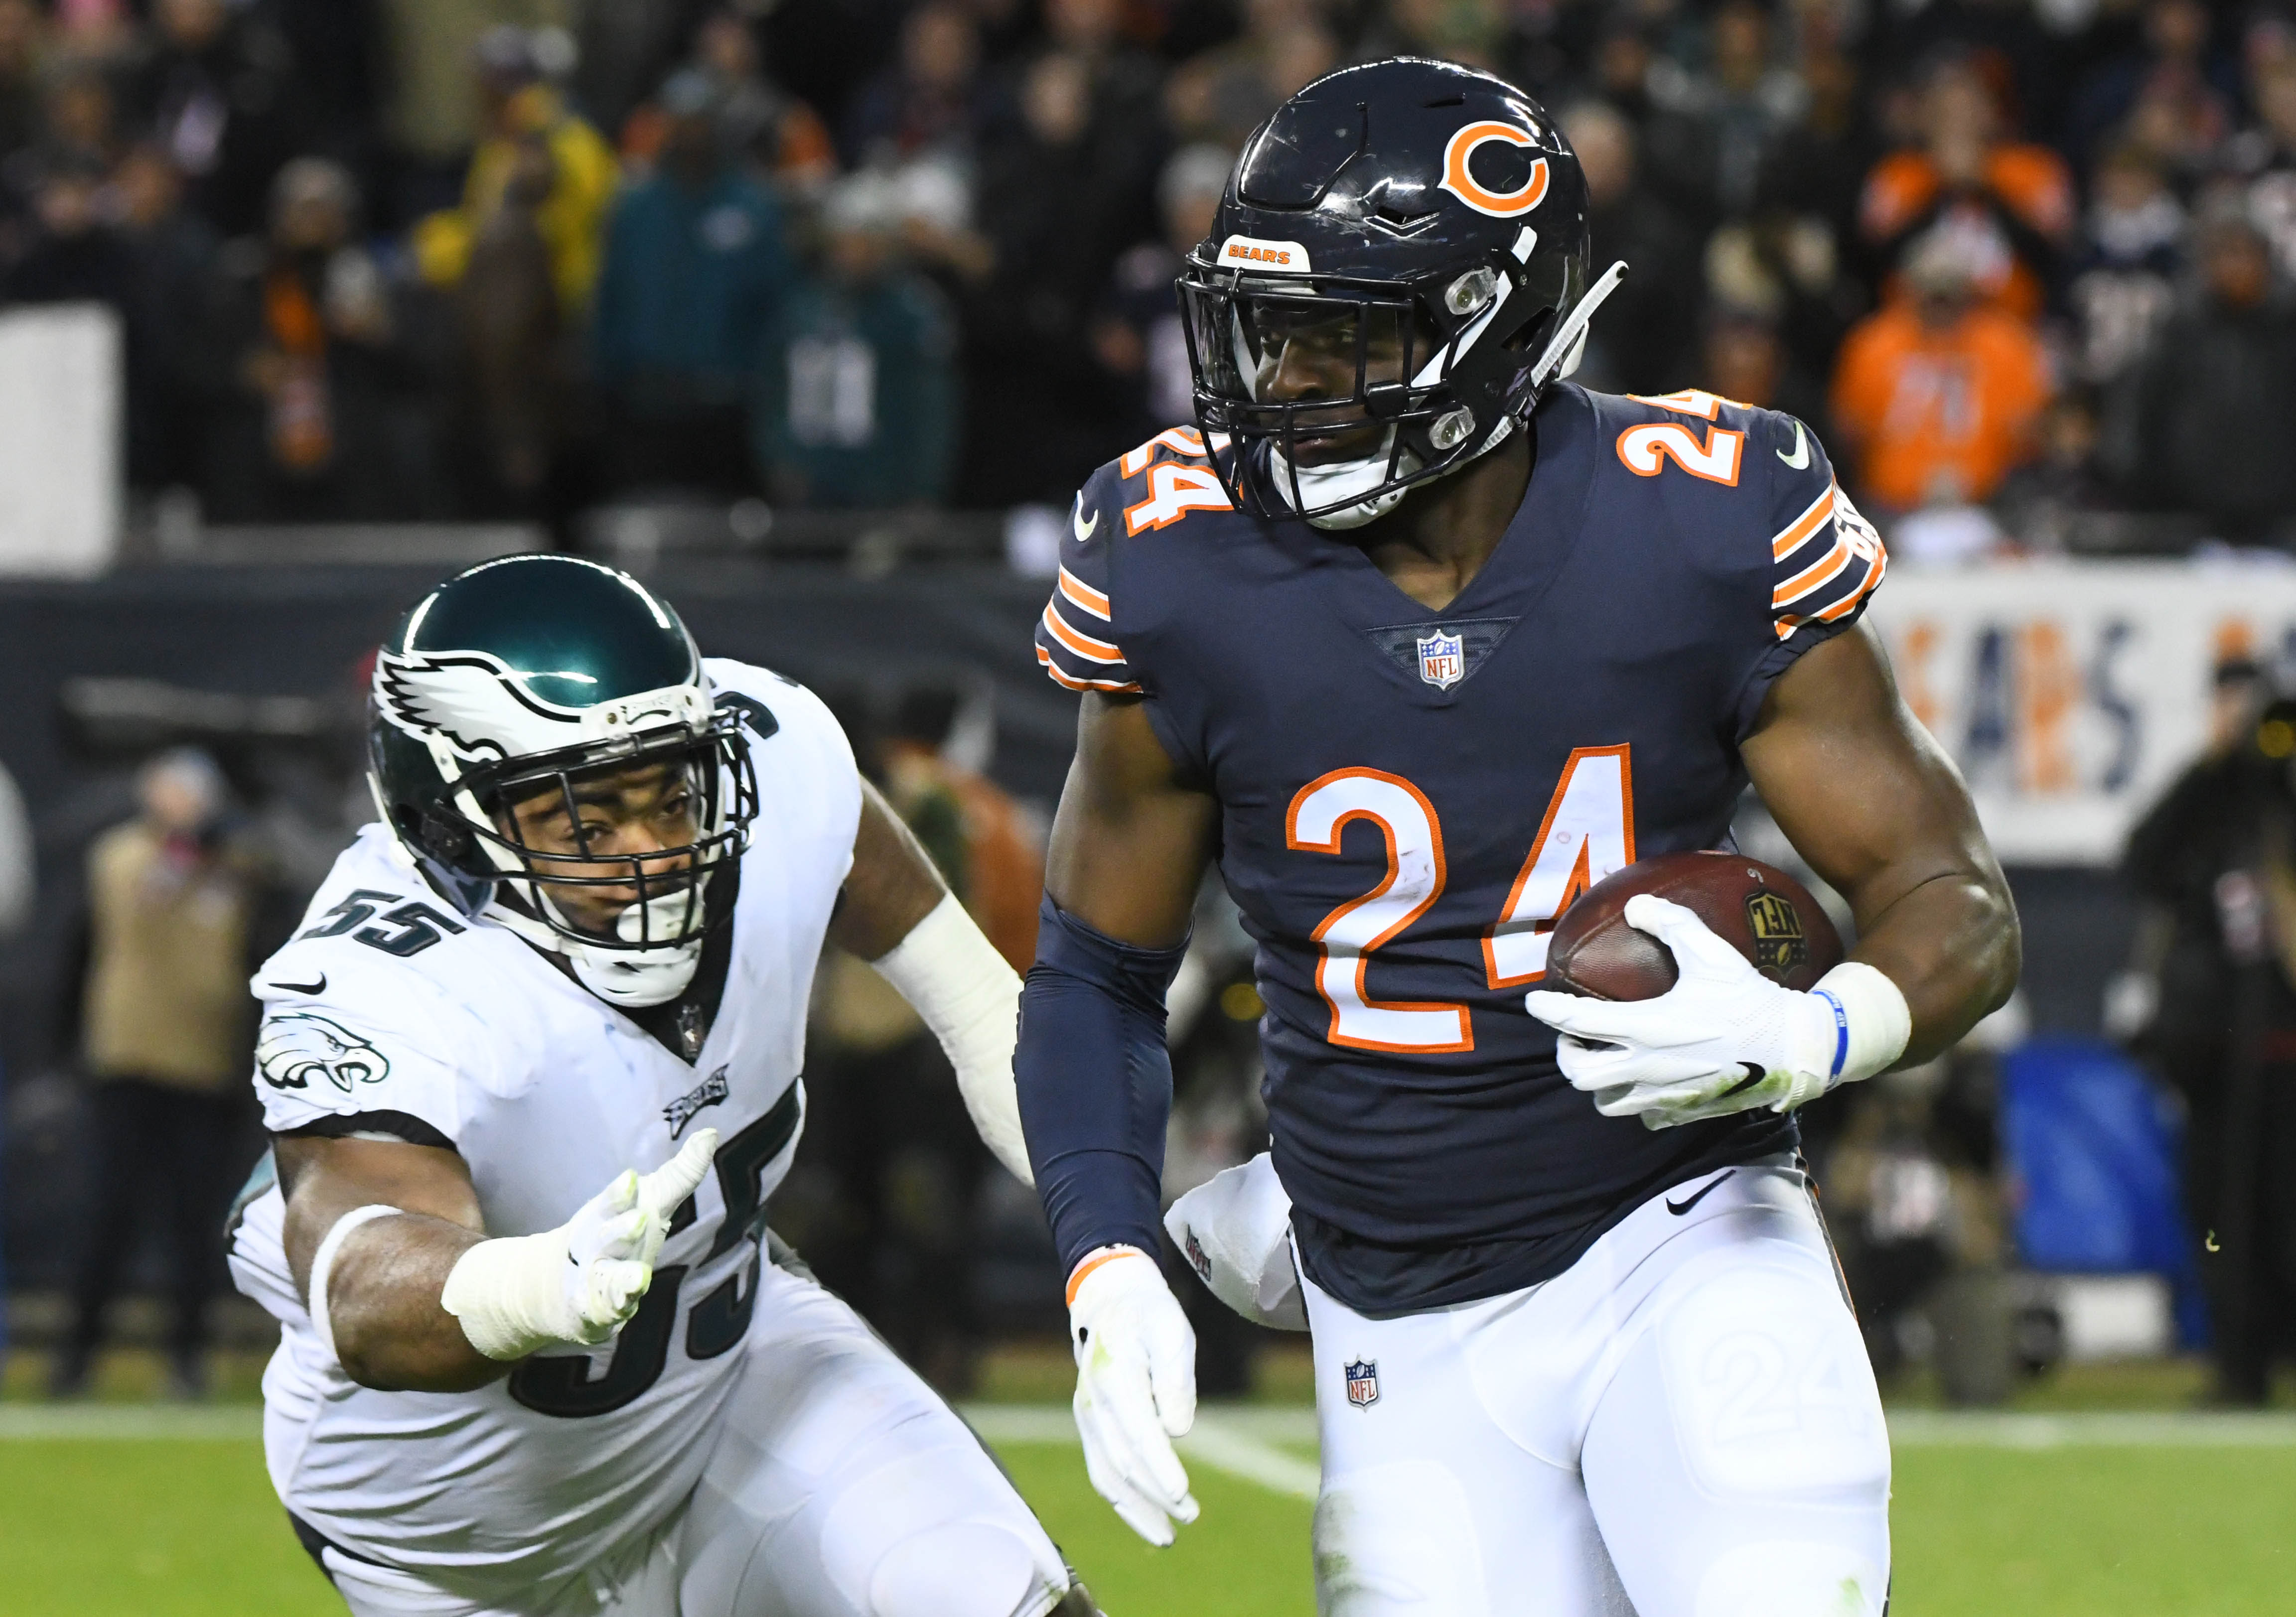 Jordan Howard’s Numbers Confirm that He’s a Really Nice Fit for the Eagles’ Offense